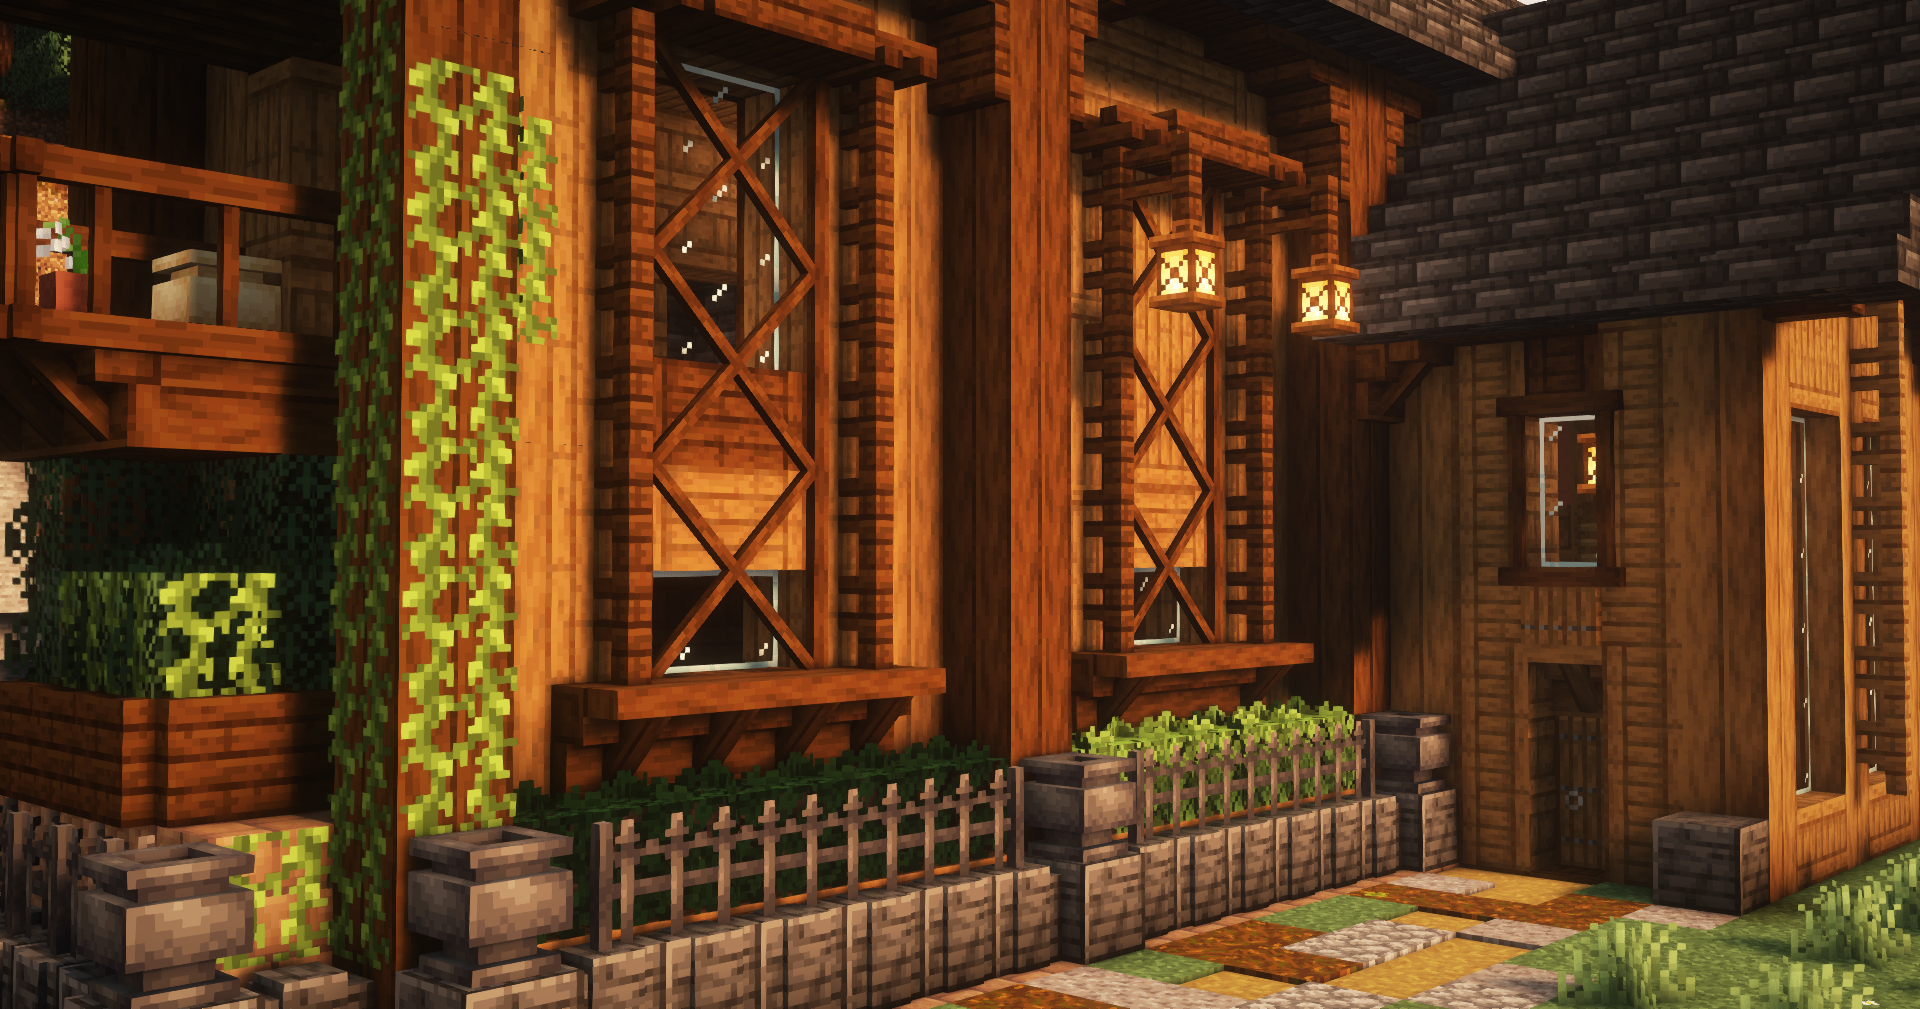 Rustic Exterior (Front) - by theOGQueso + t8pany